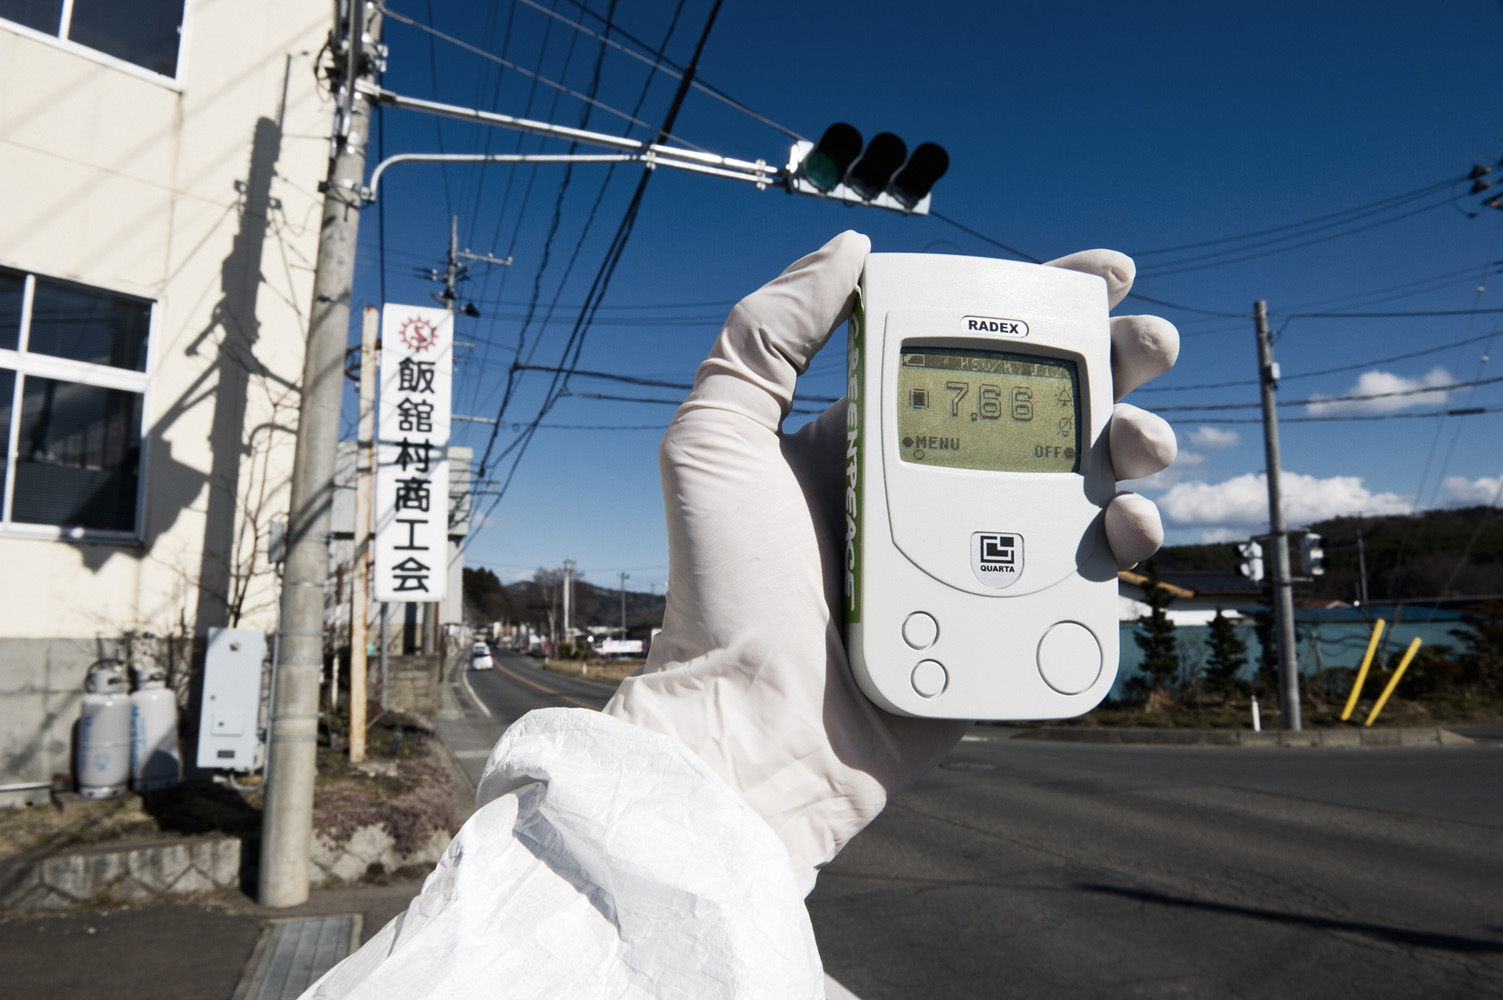 Iitate, Fukushima Prefecture  Japan, 27 March 2011 Greenpeace monitoring radiation levels far above legal limits. The geiger counter showing 7.66 micro Sievert per hour, and within 6 days people would receive a yearly dose of radioactivity. Iitate is located more then 40 km from Fukushima Nuclear Power Station and the village has still not been evacuated.